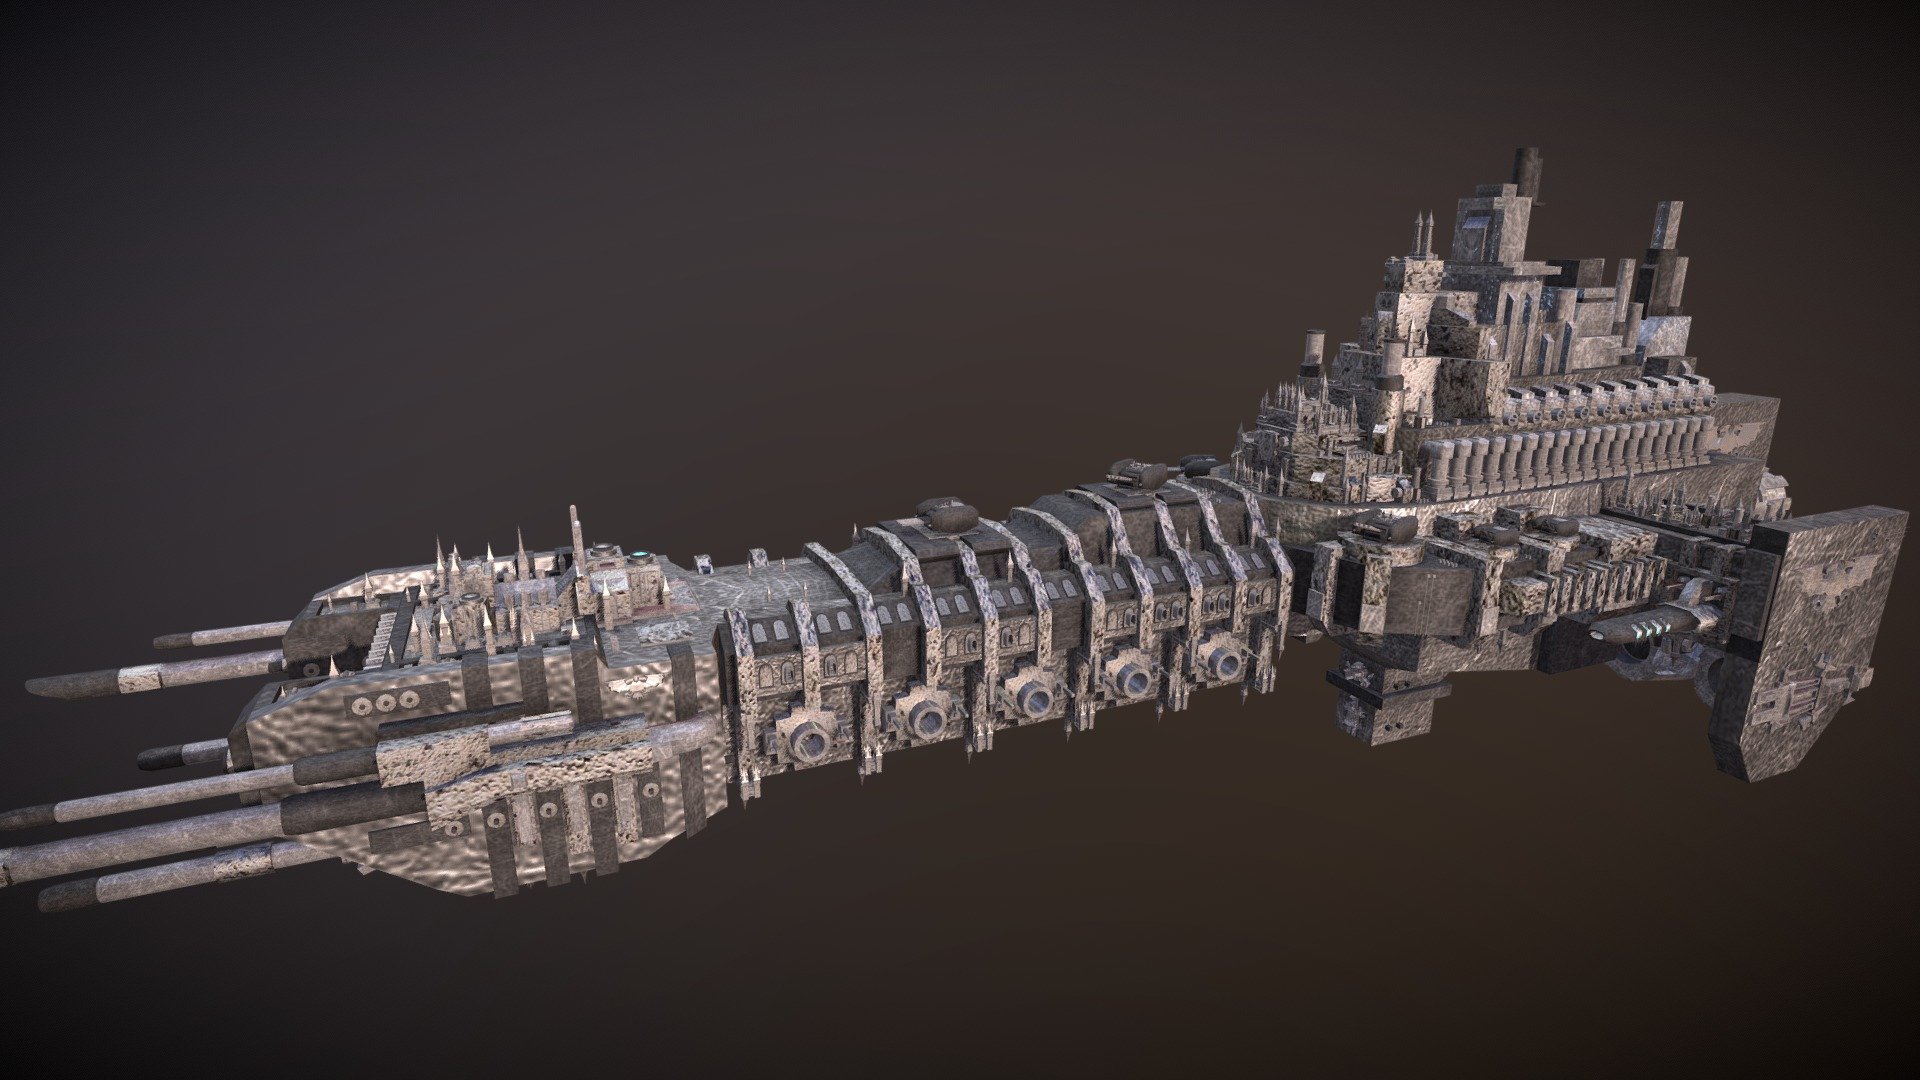 Warhammer 40k Battle Barge - Download Free 3D model by taumich (@taumich)  [f5496c1]